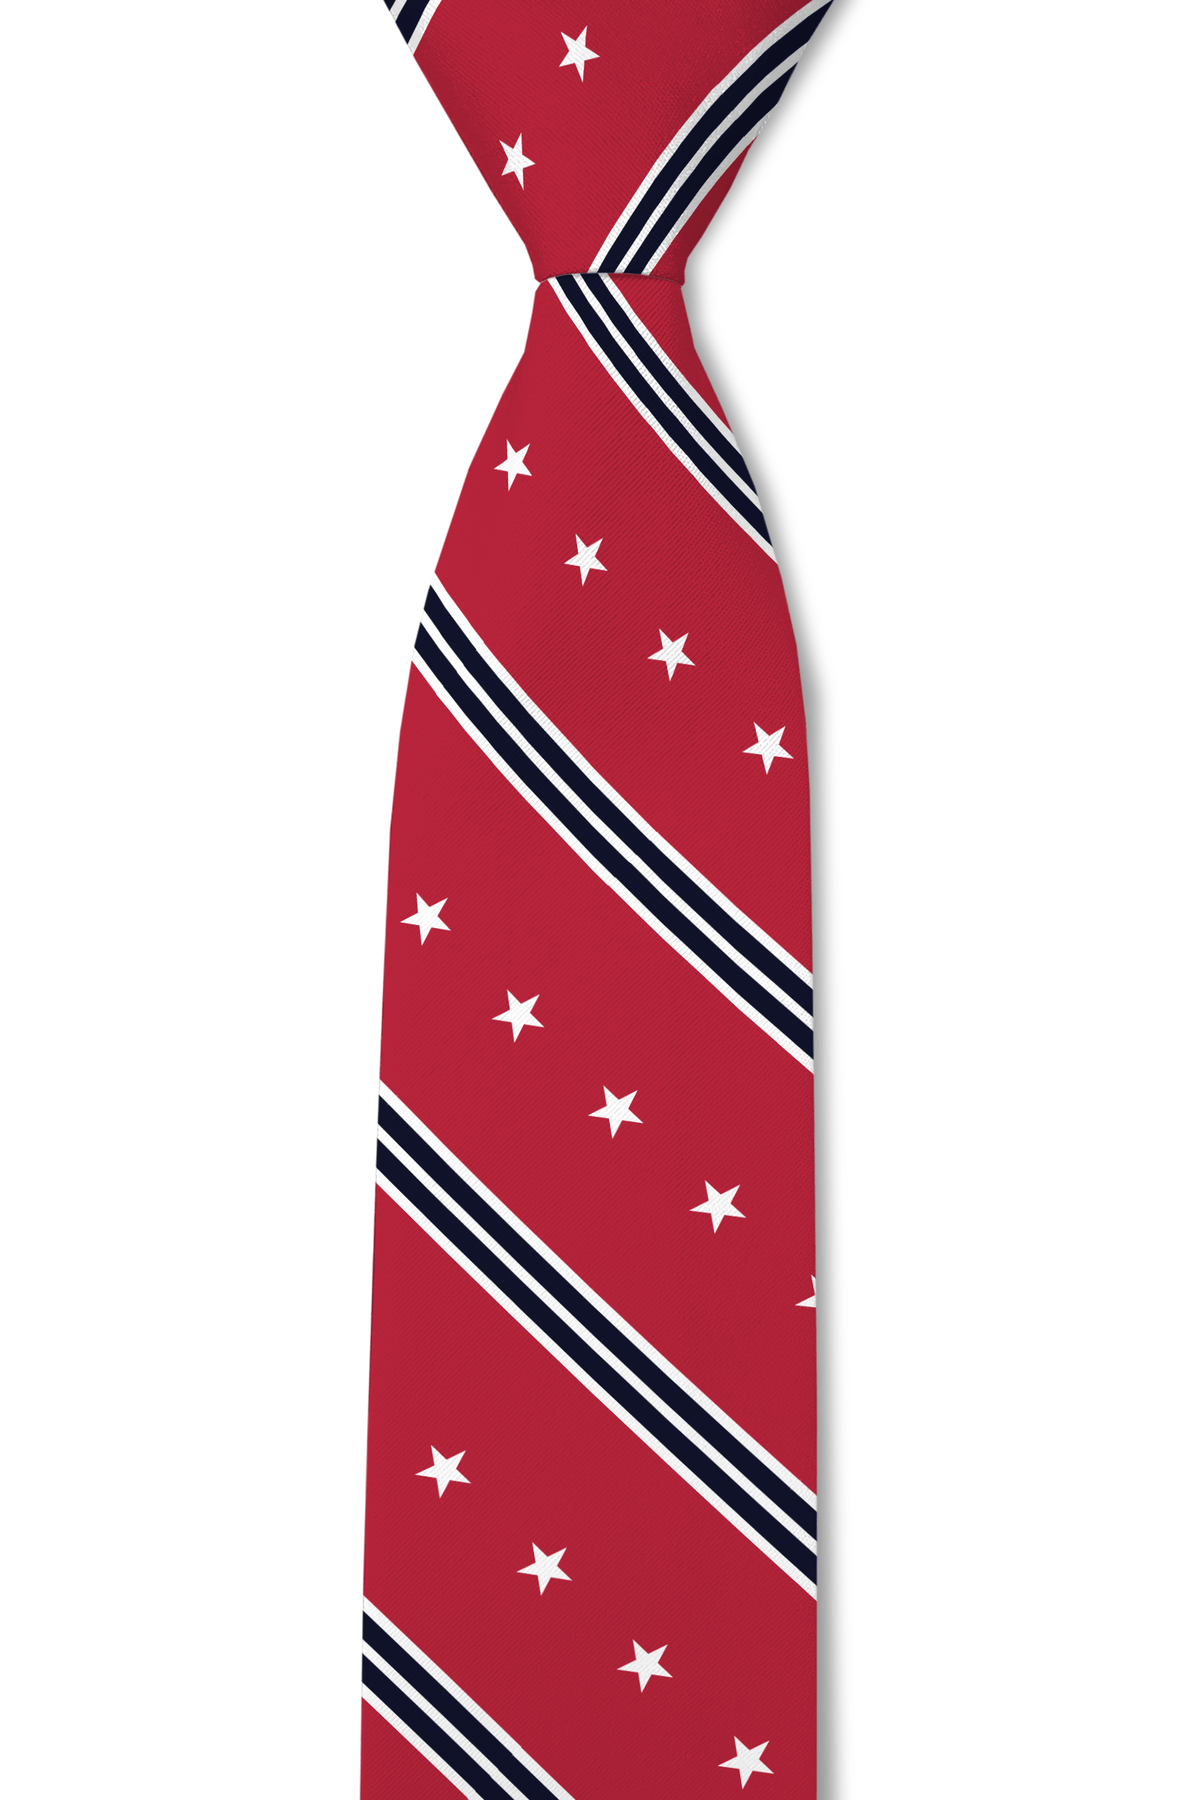 https://cdn.shopify.com/s/files/1/1461/5016/products/Red-glory-american-tie-top_1200x.png?v=1624906142